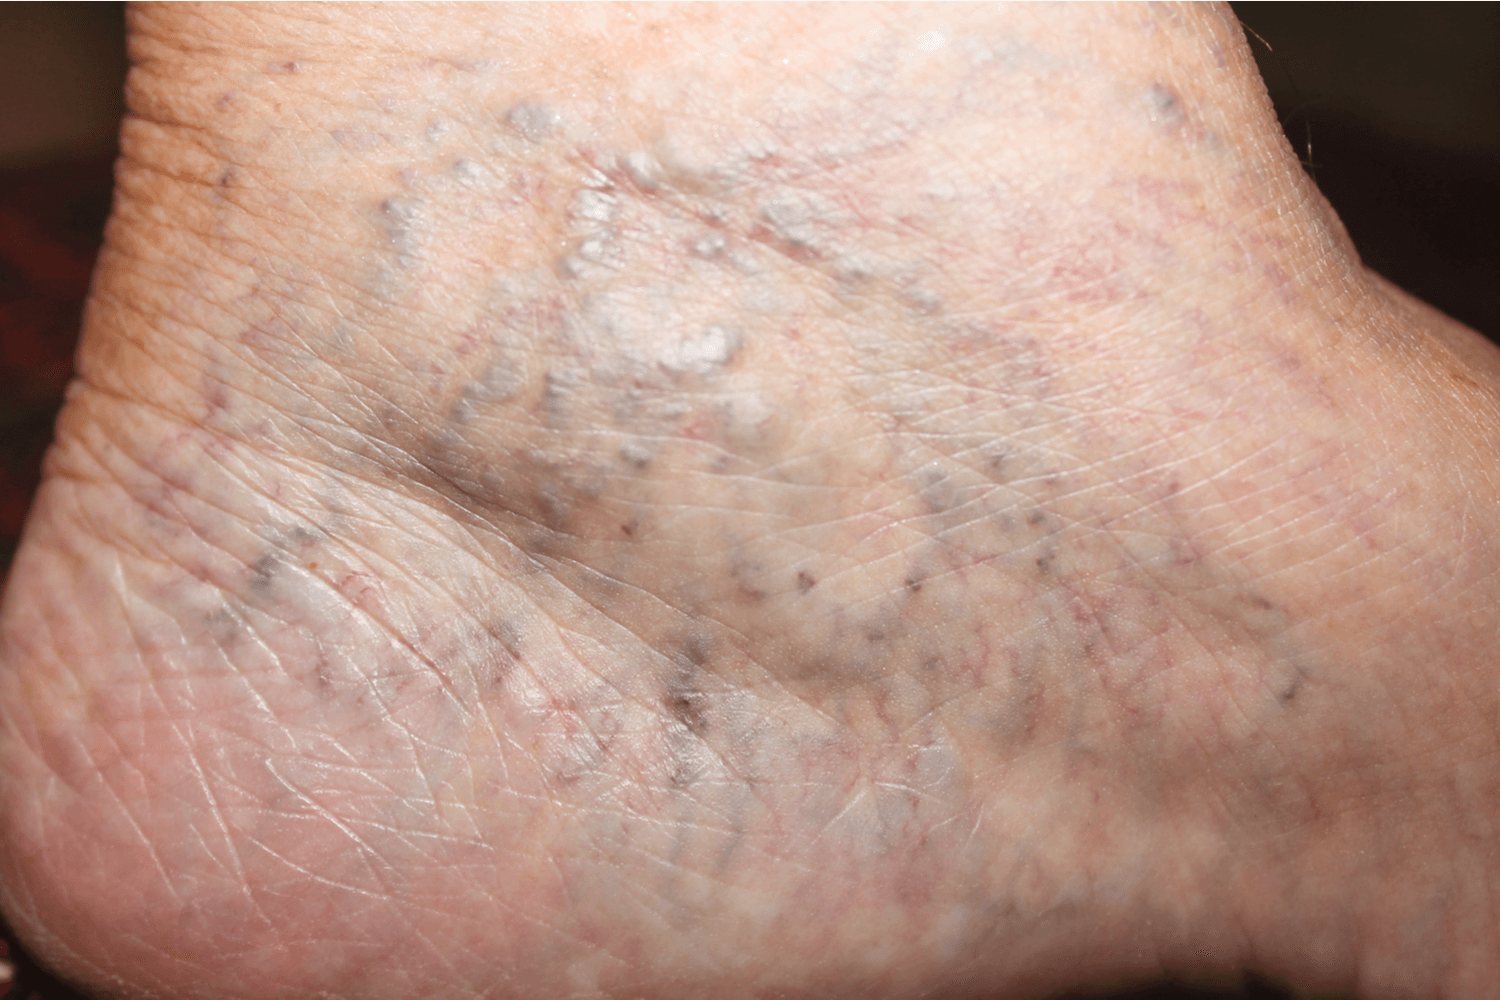 Spider veins visible around the ankles